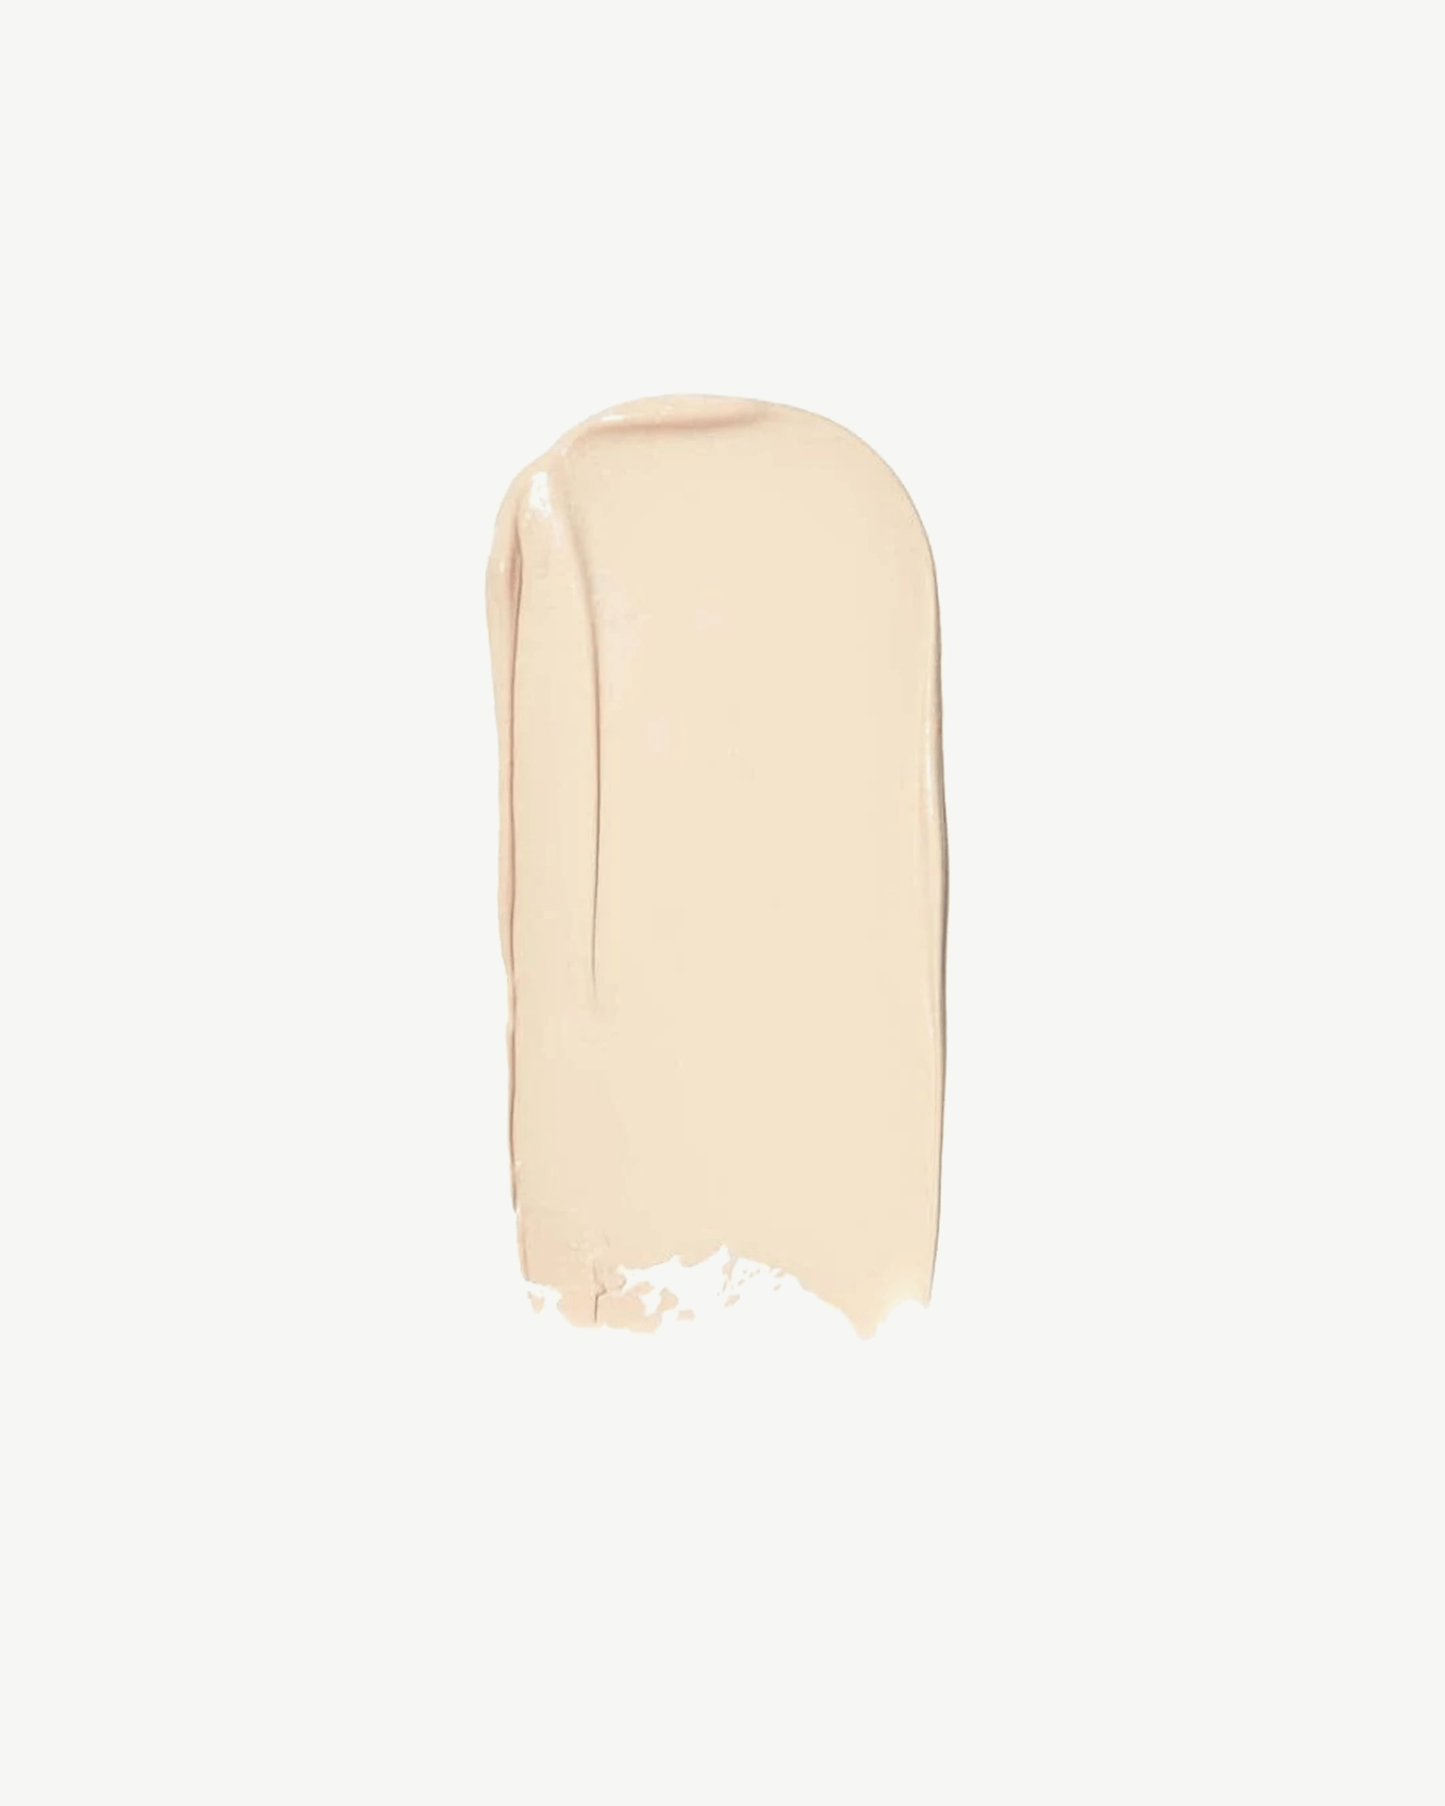 Shade 000 (for very fair skin with neutral undertones)